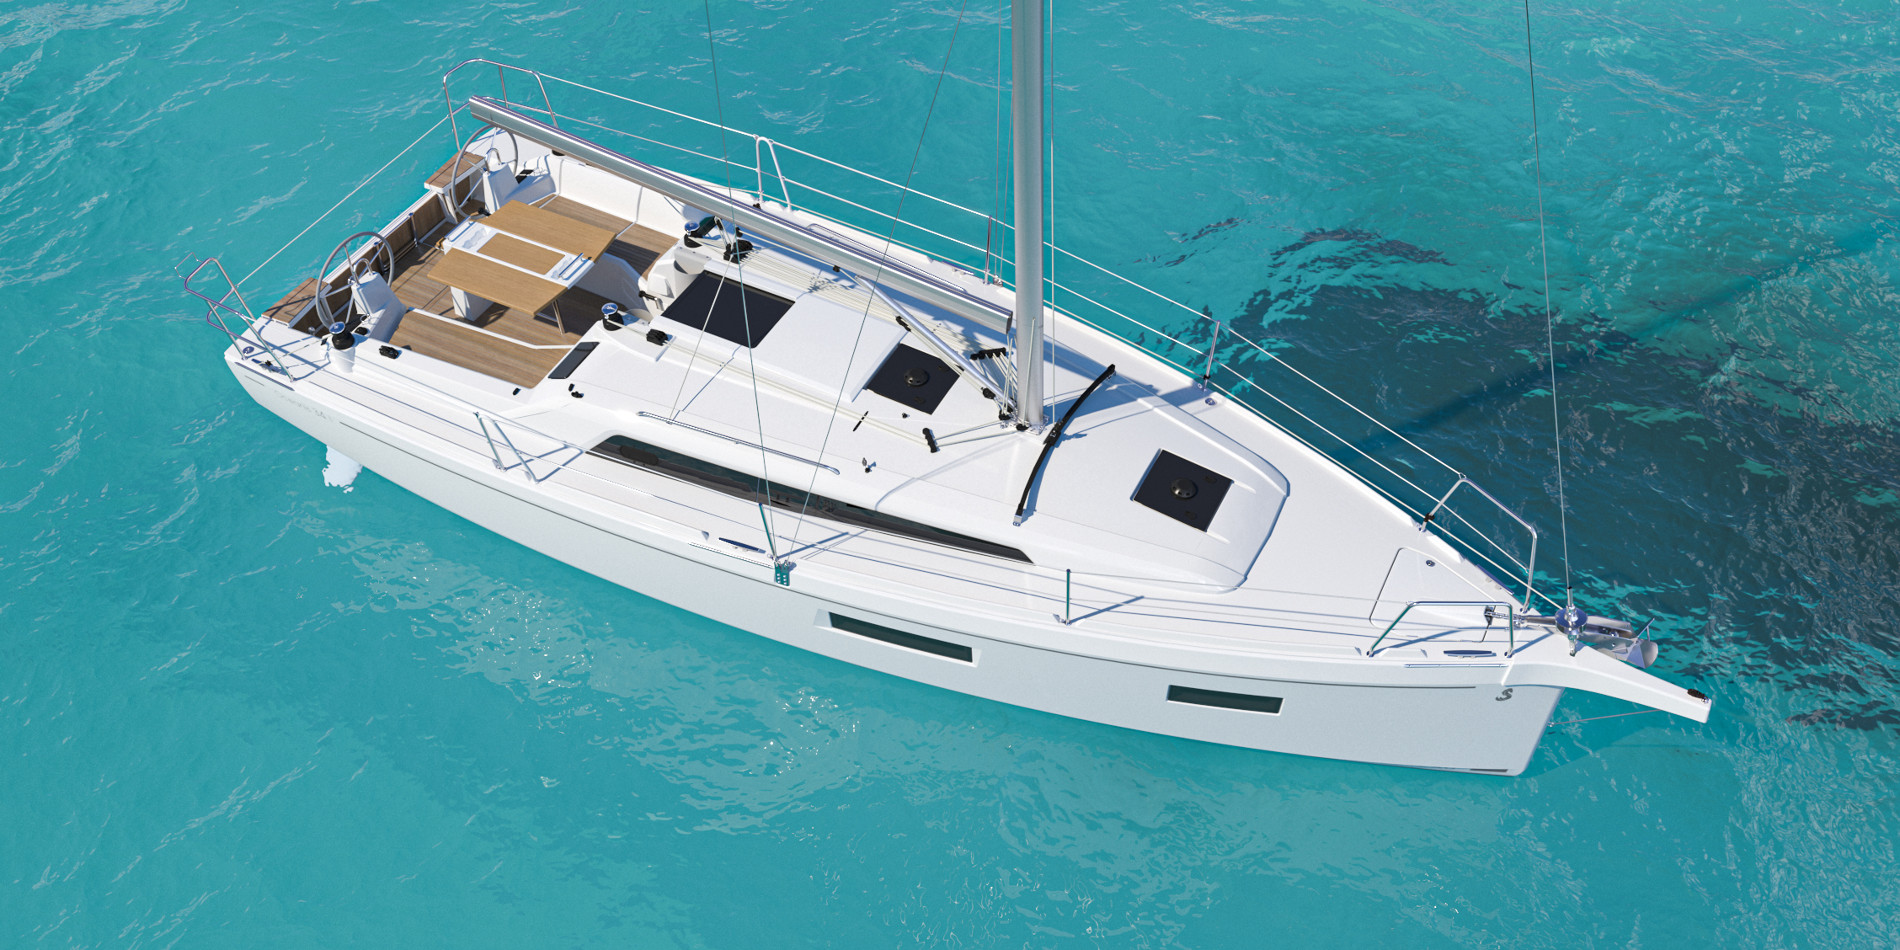 Introducing the new Oceanis 34.1